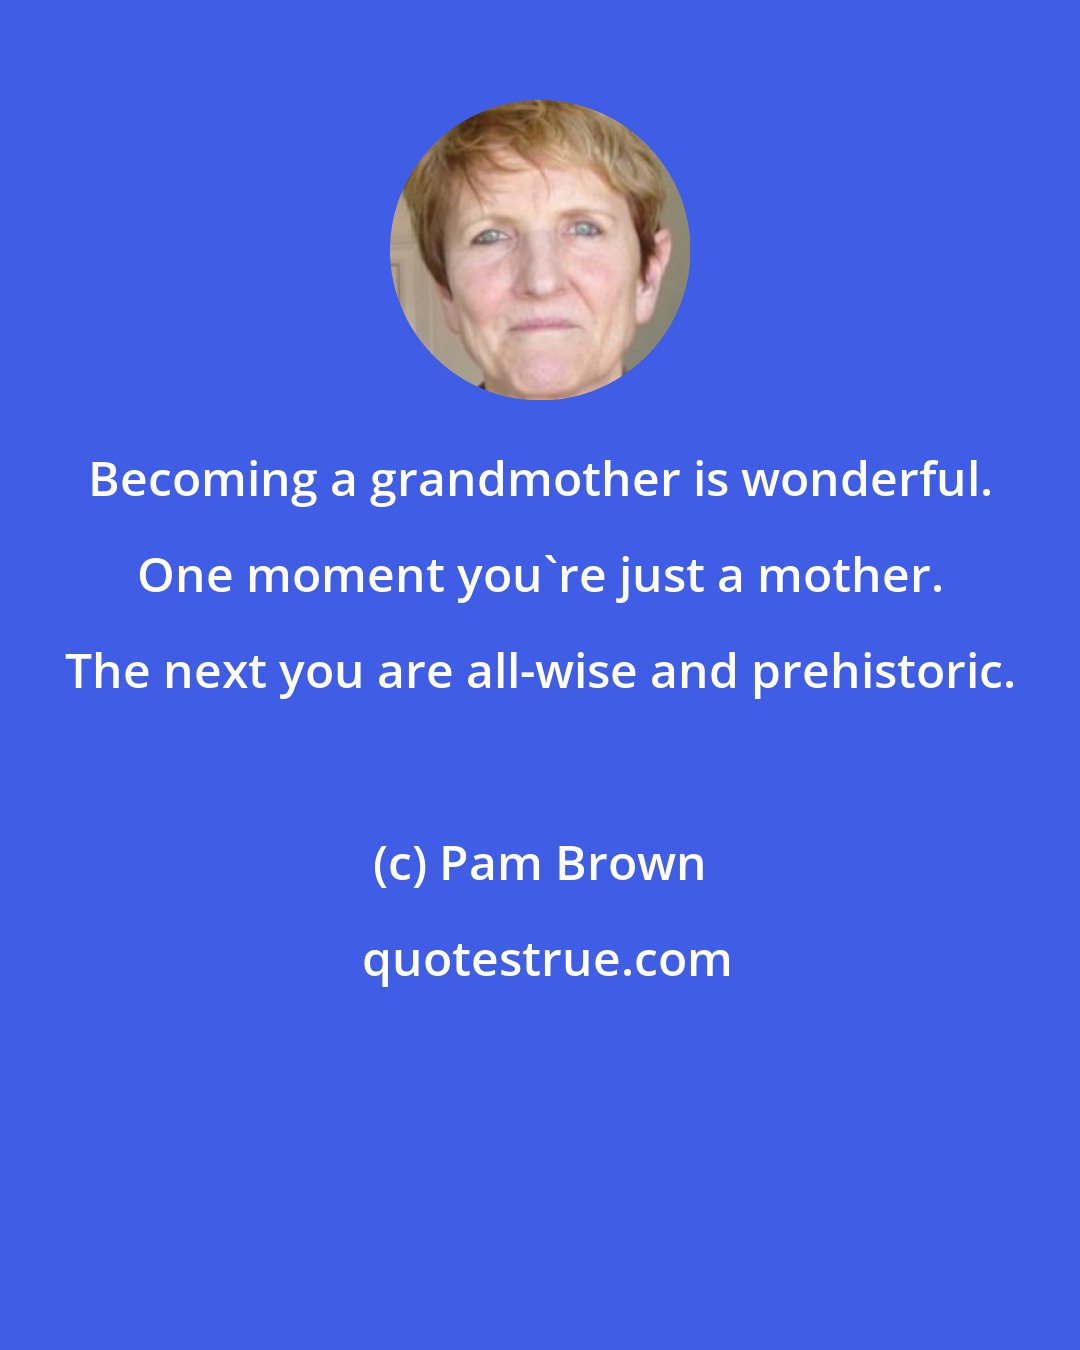 Pam Brown: Becoming a grandmother is wonderful. One moment you're just a mother. The next you are all-wise and prehistoric.